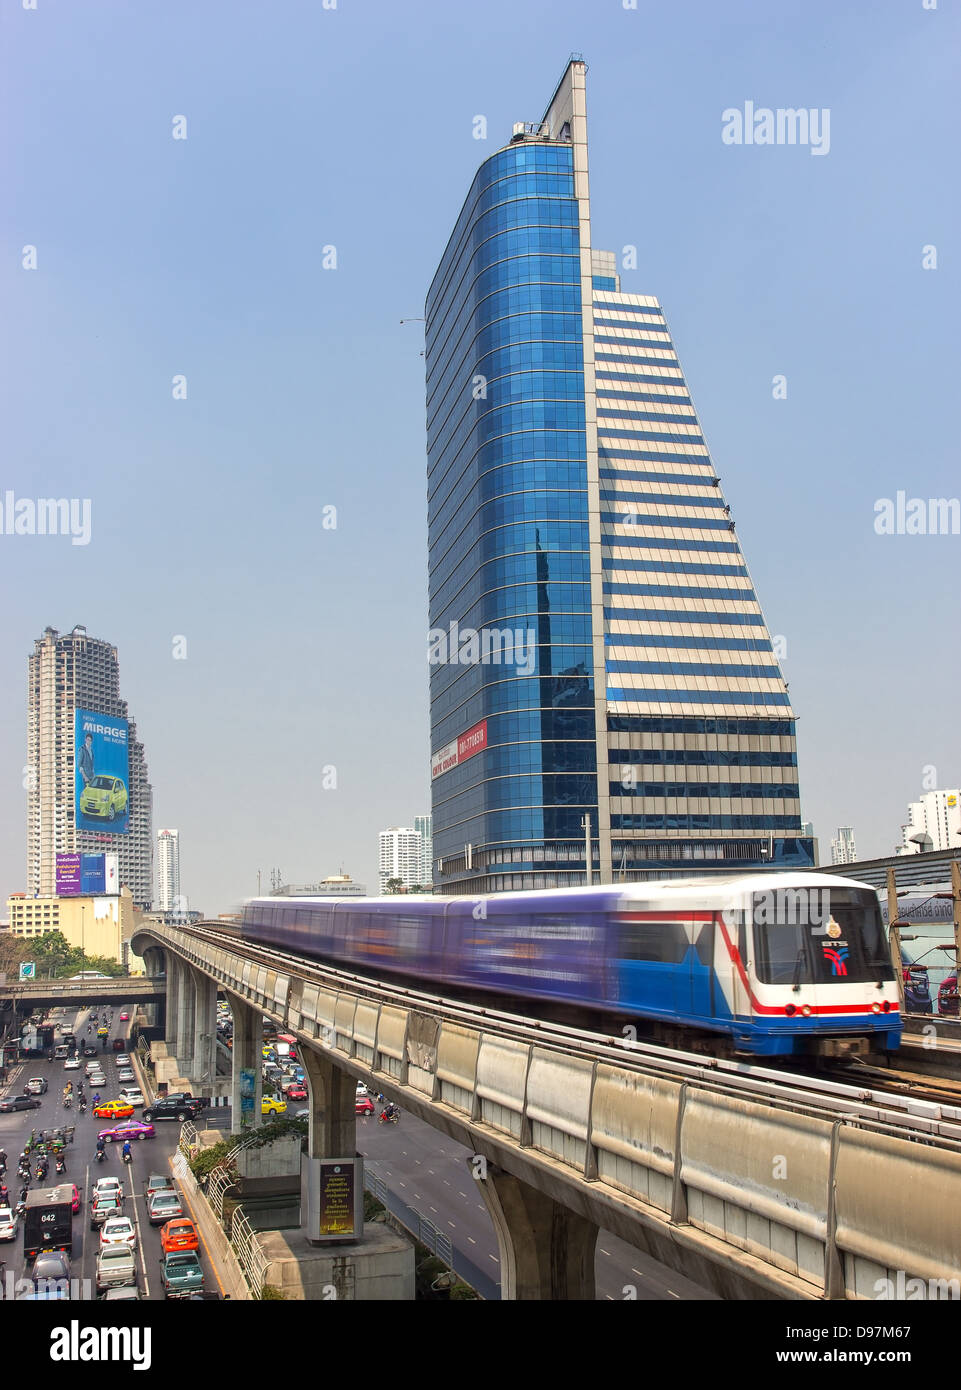 Sky train in Bangkok with building Stock Photo